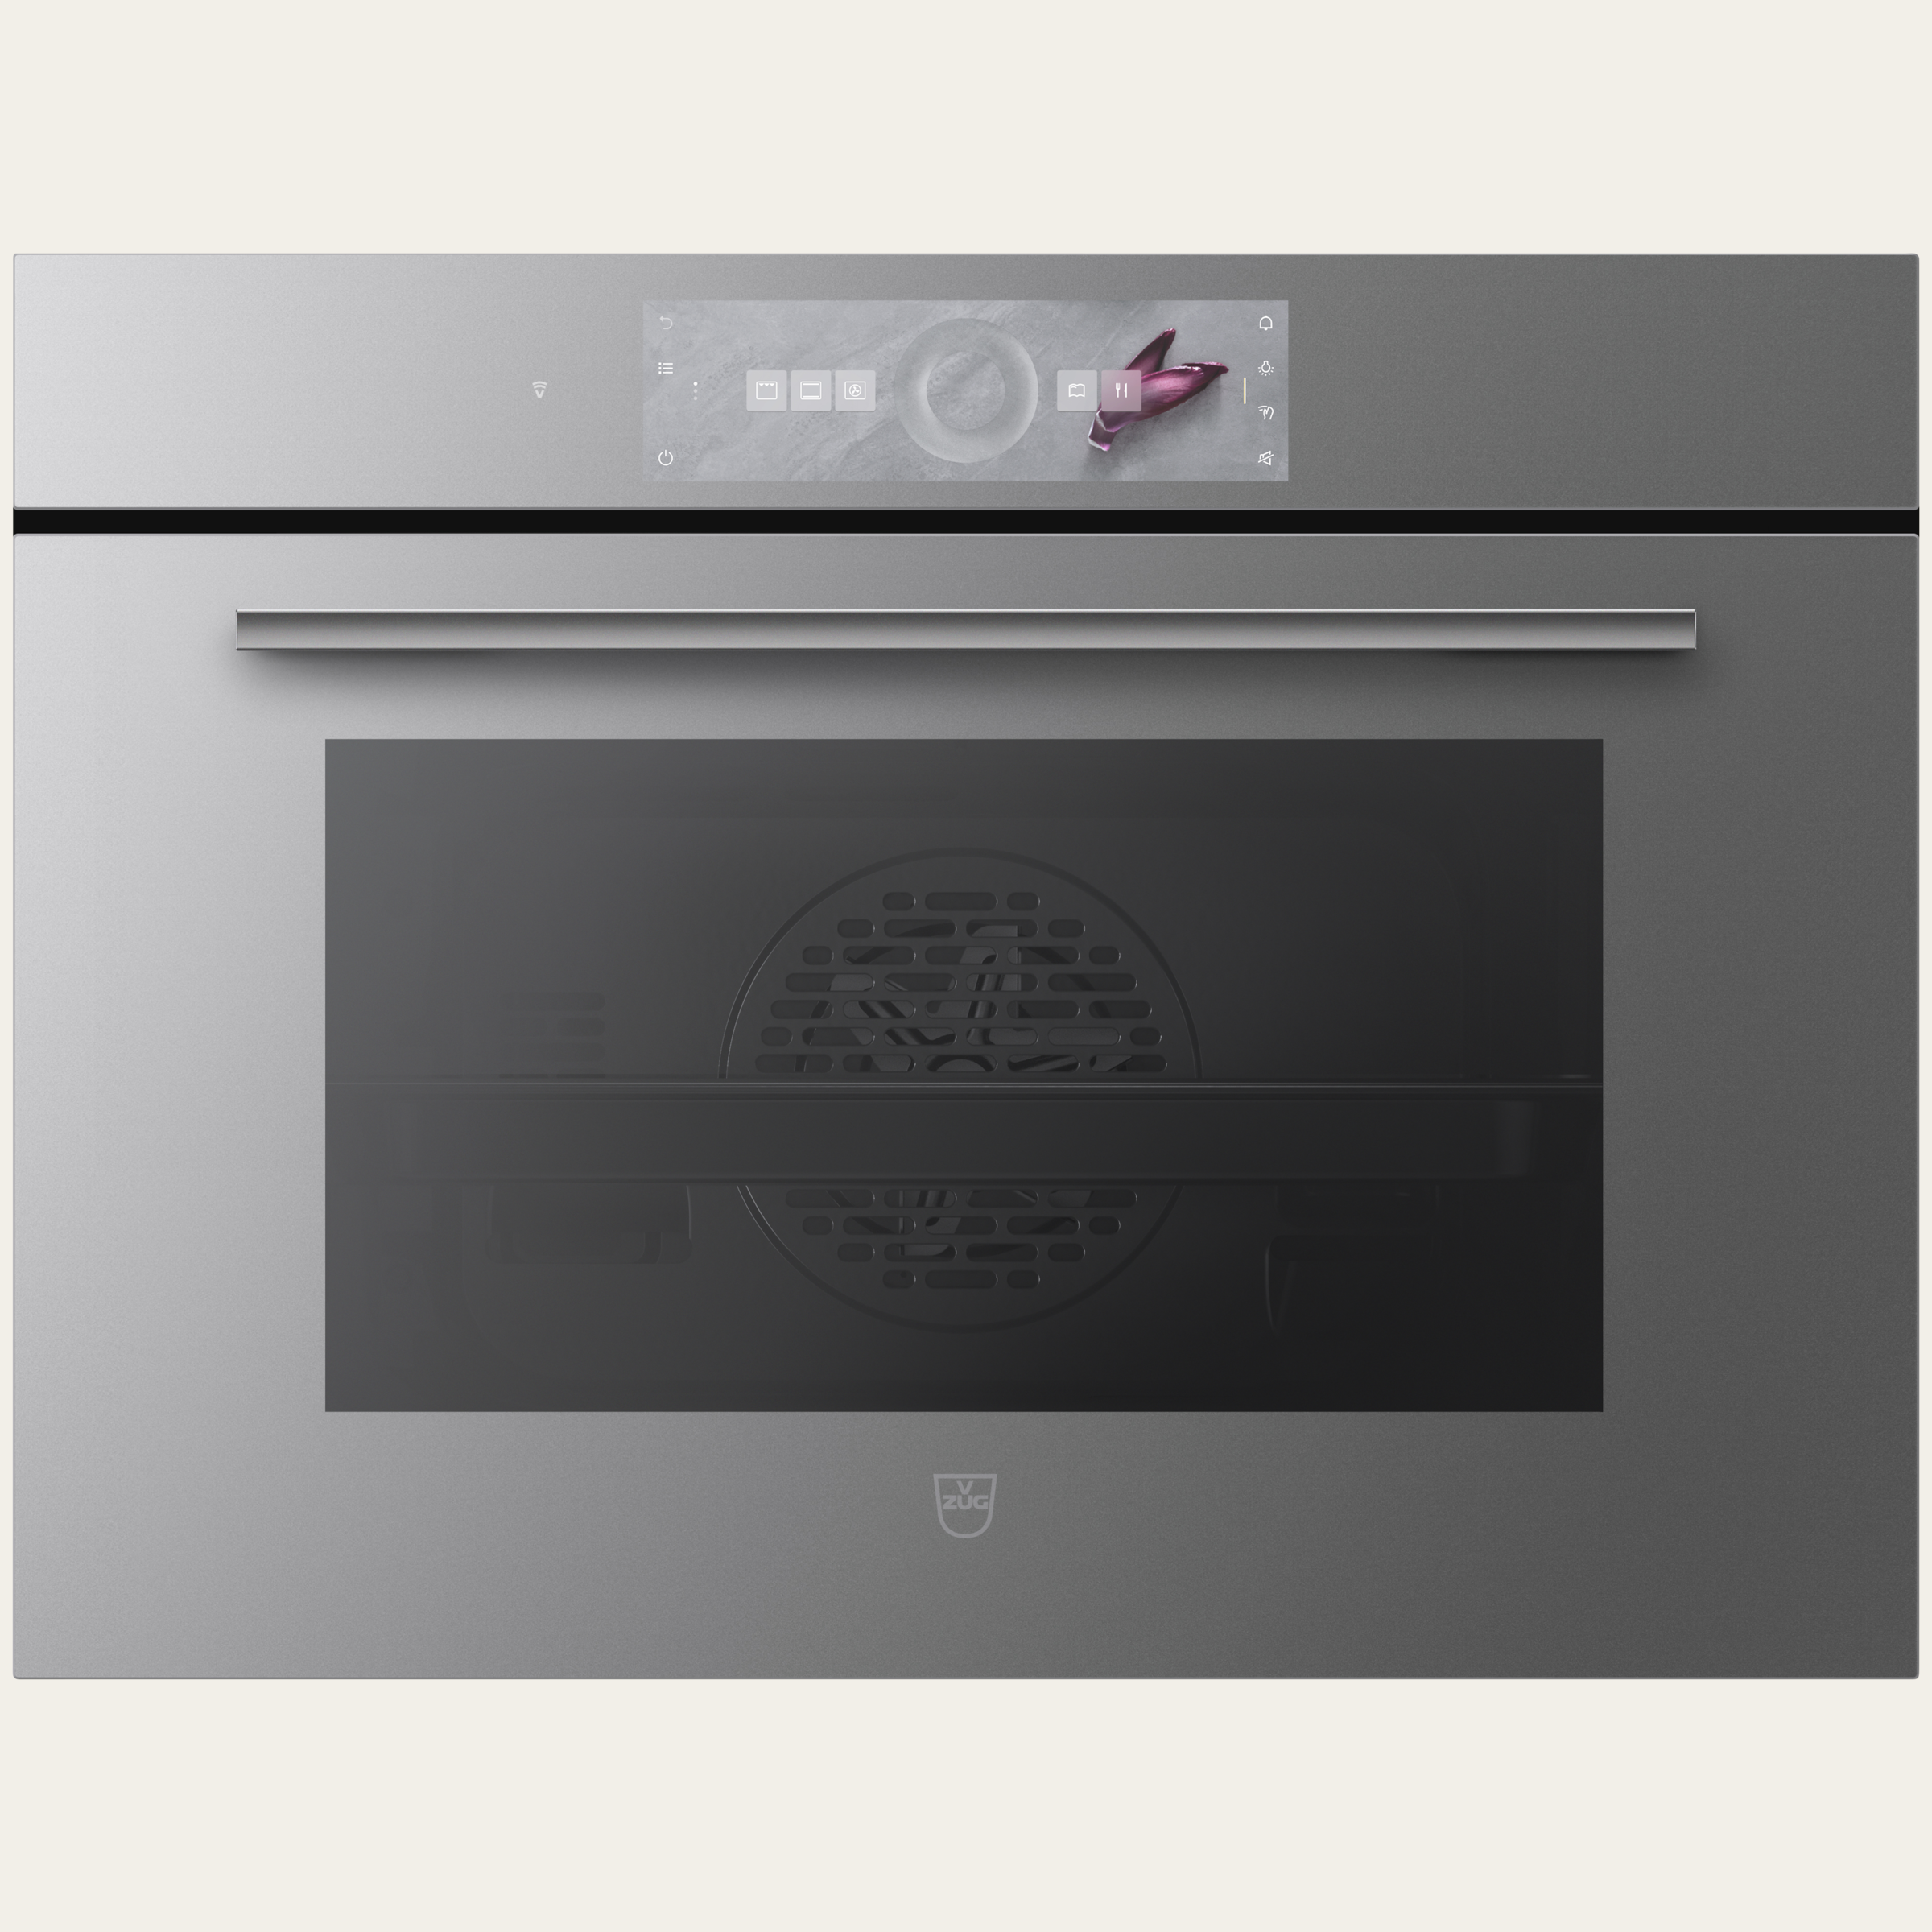 V-ZUG Oven Combair V6000 45P, Standard width: 60 cm,Standard height: 45 cm, Platinum mirror glass, Touchscreen with CircleSlider, V-ZUG-Home, Pyrolytic self-cleaning